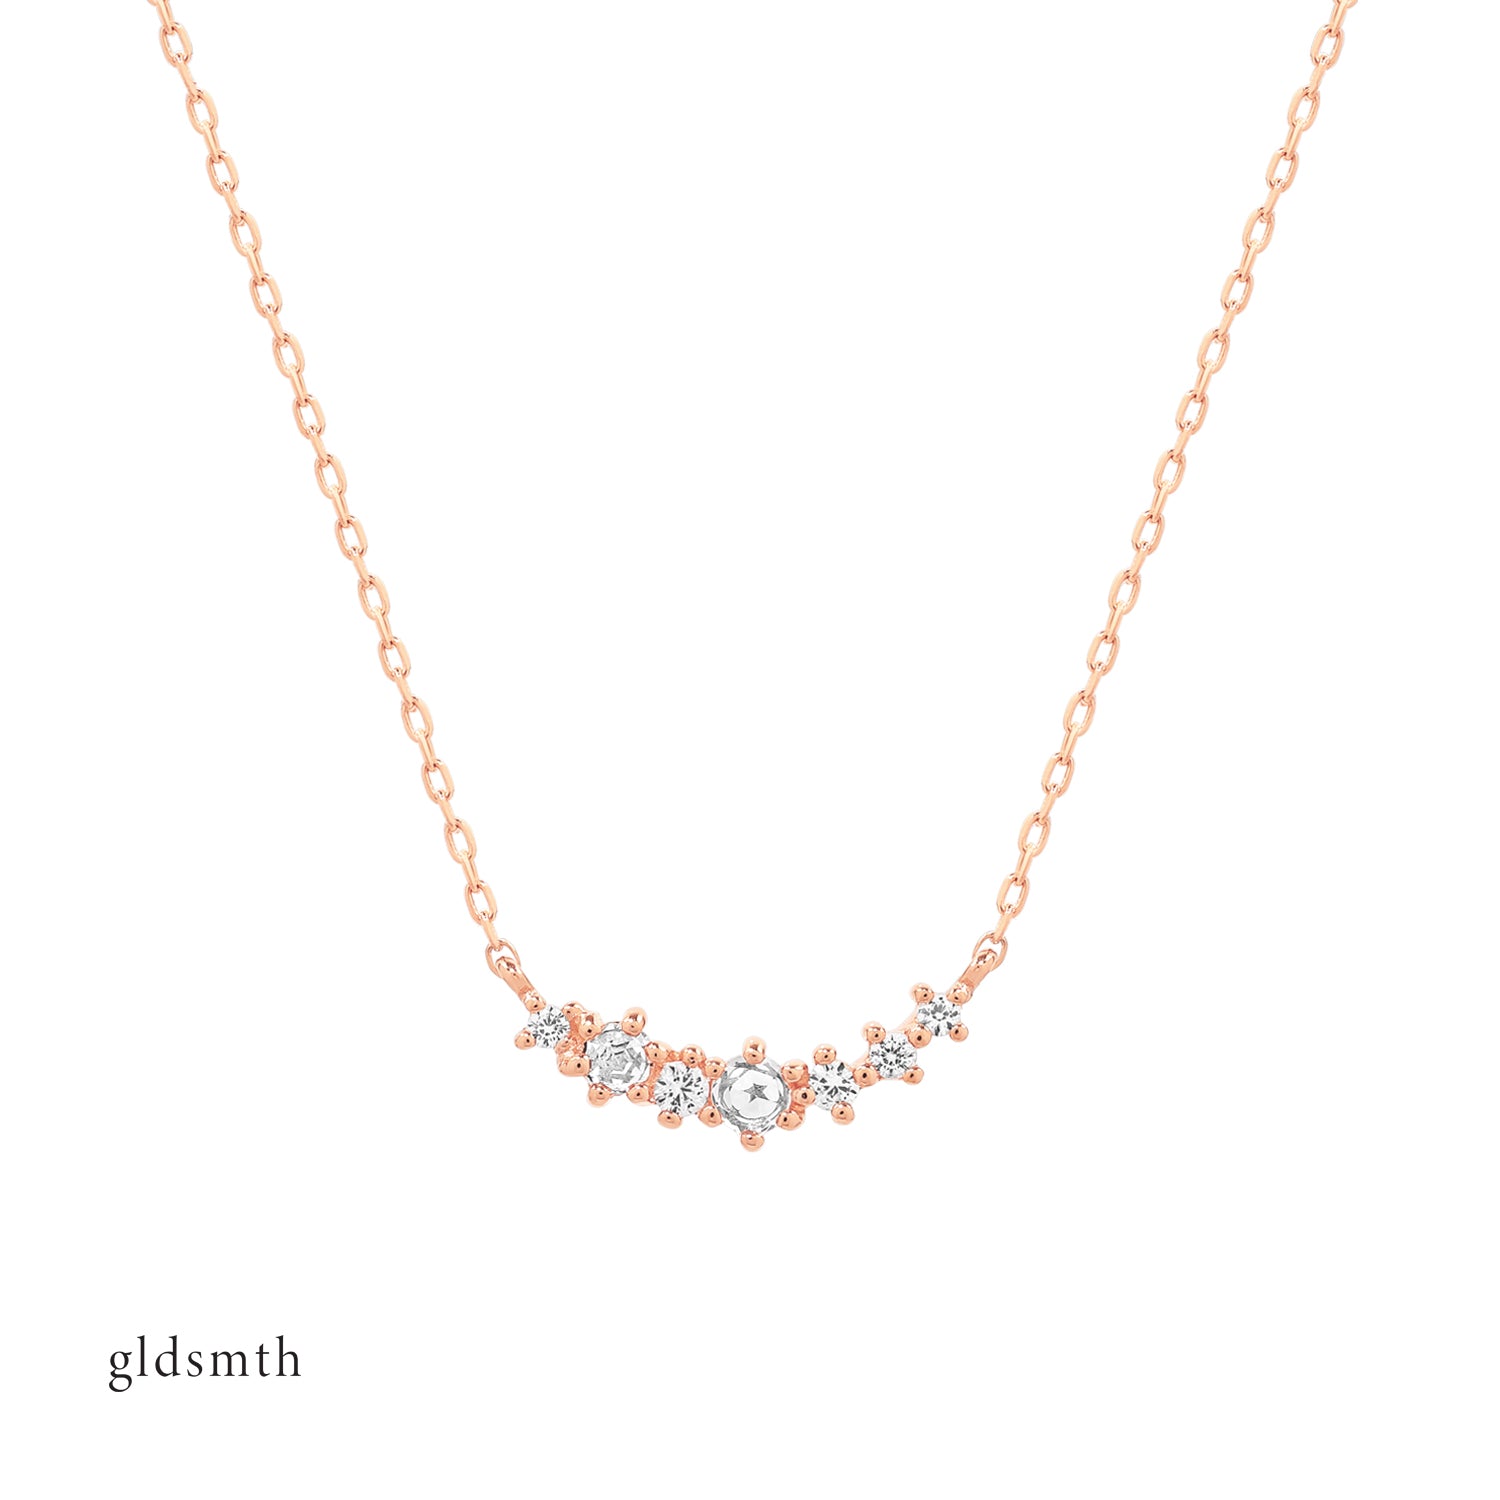 Luxurious and fine necklace. Handcrafted 14k solid rose gold necklace with white sapphires